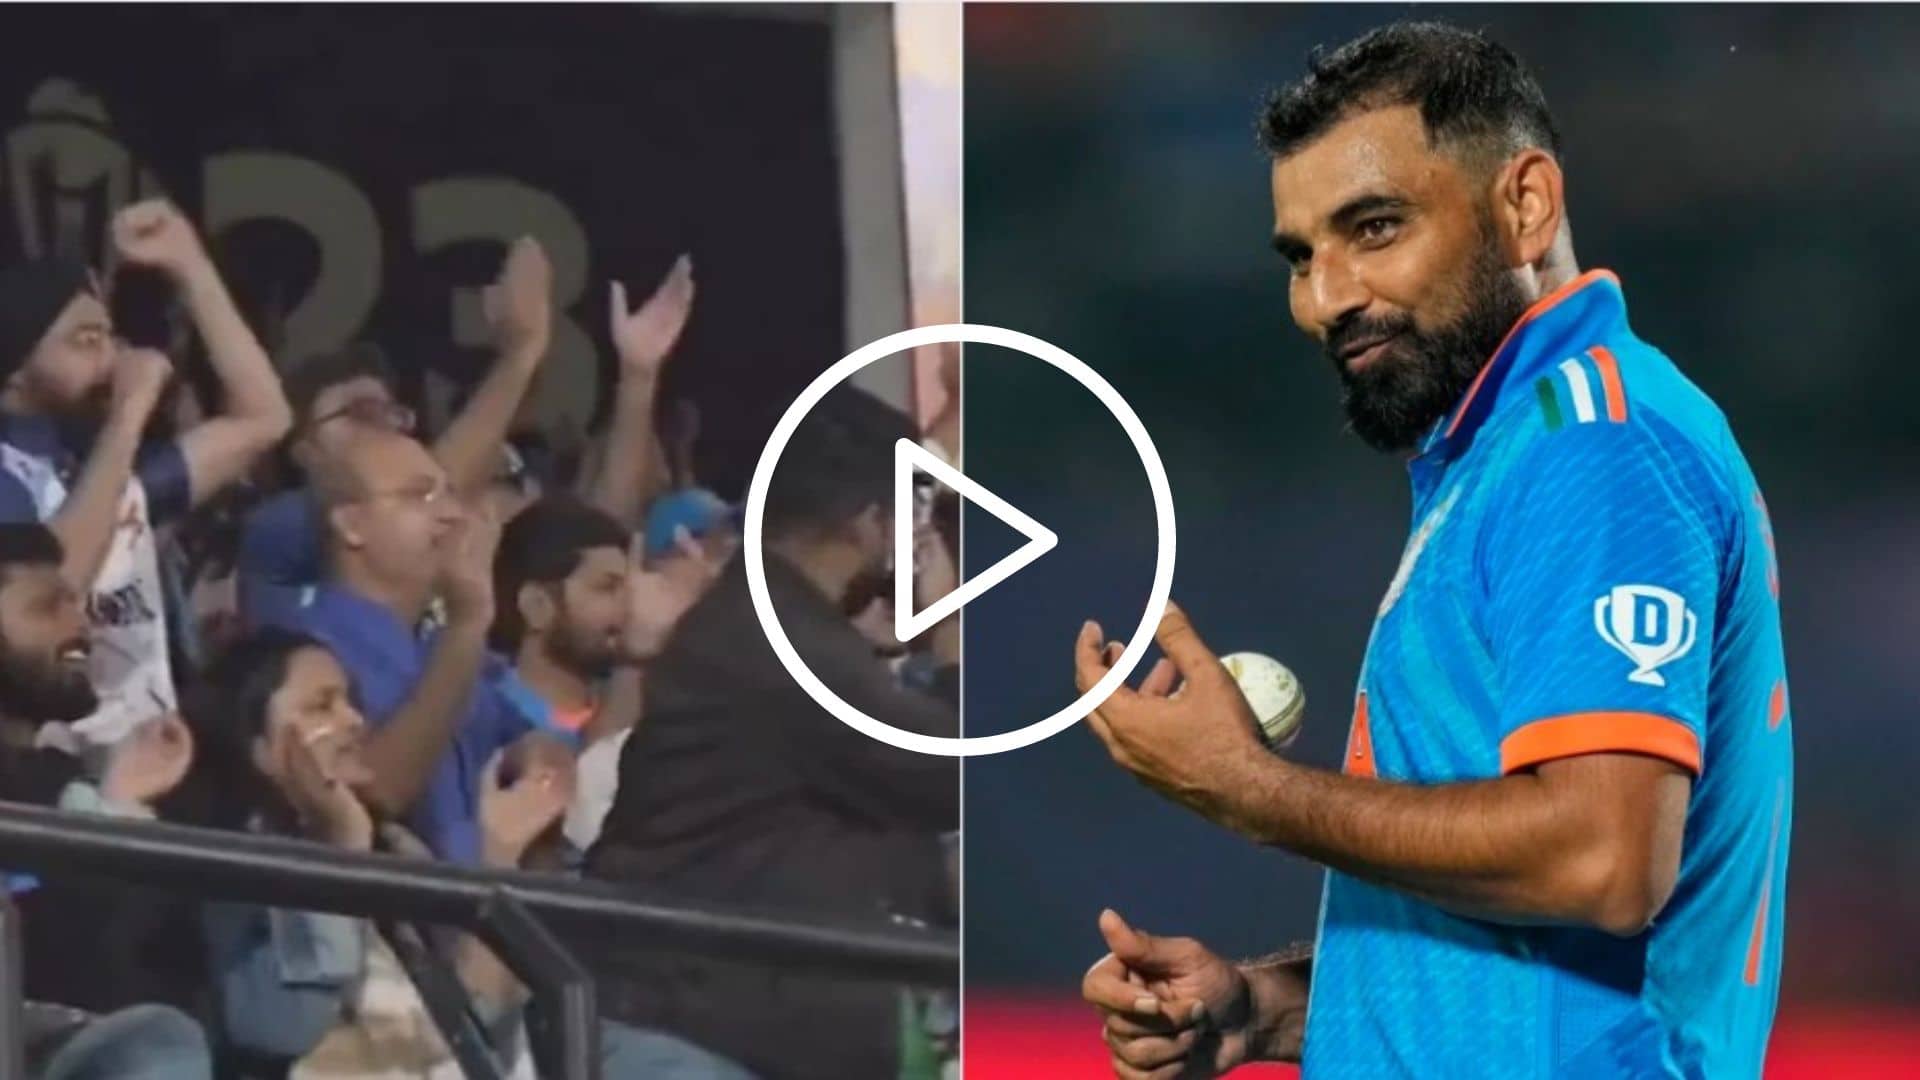 [Watch] Wankhede Crowd's Thunderous Chants for Mohammed Shami During IND Vs SL Clash